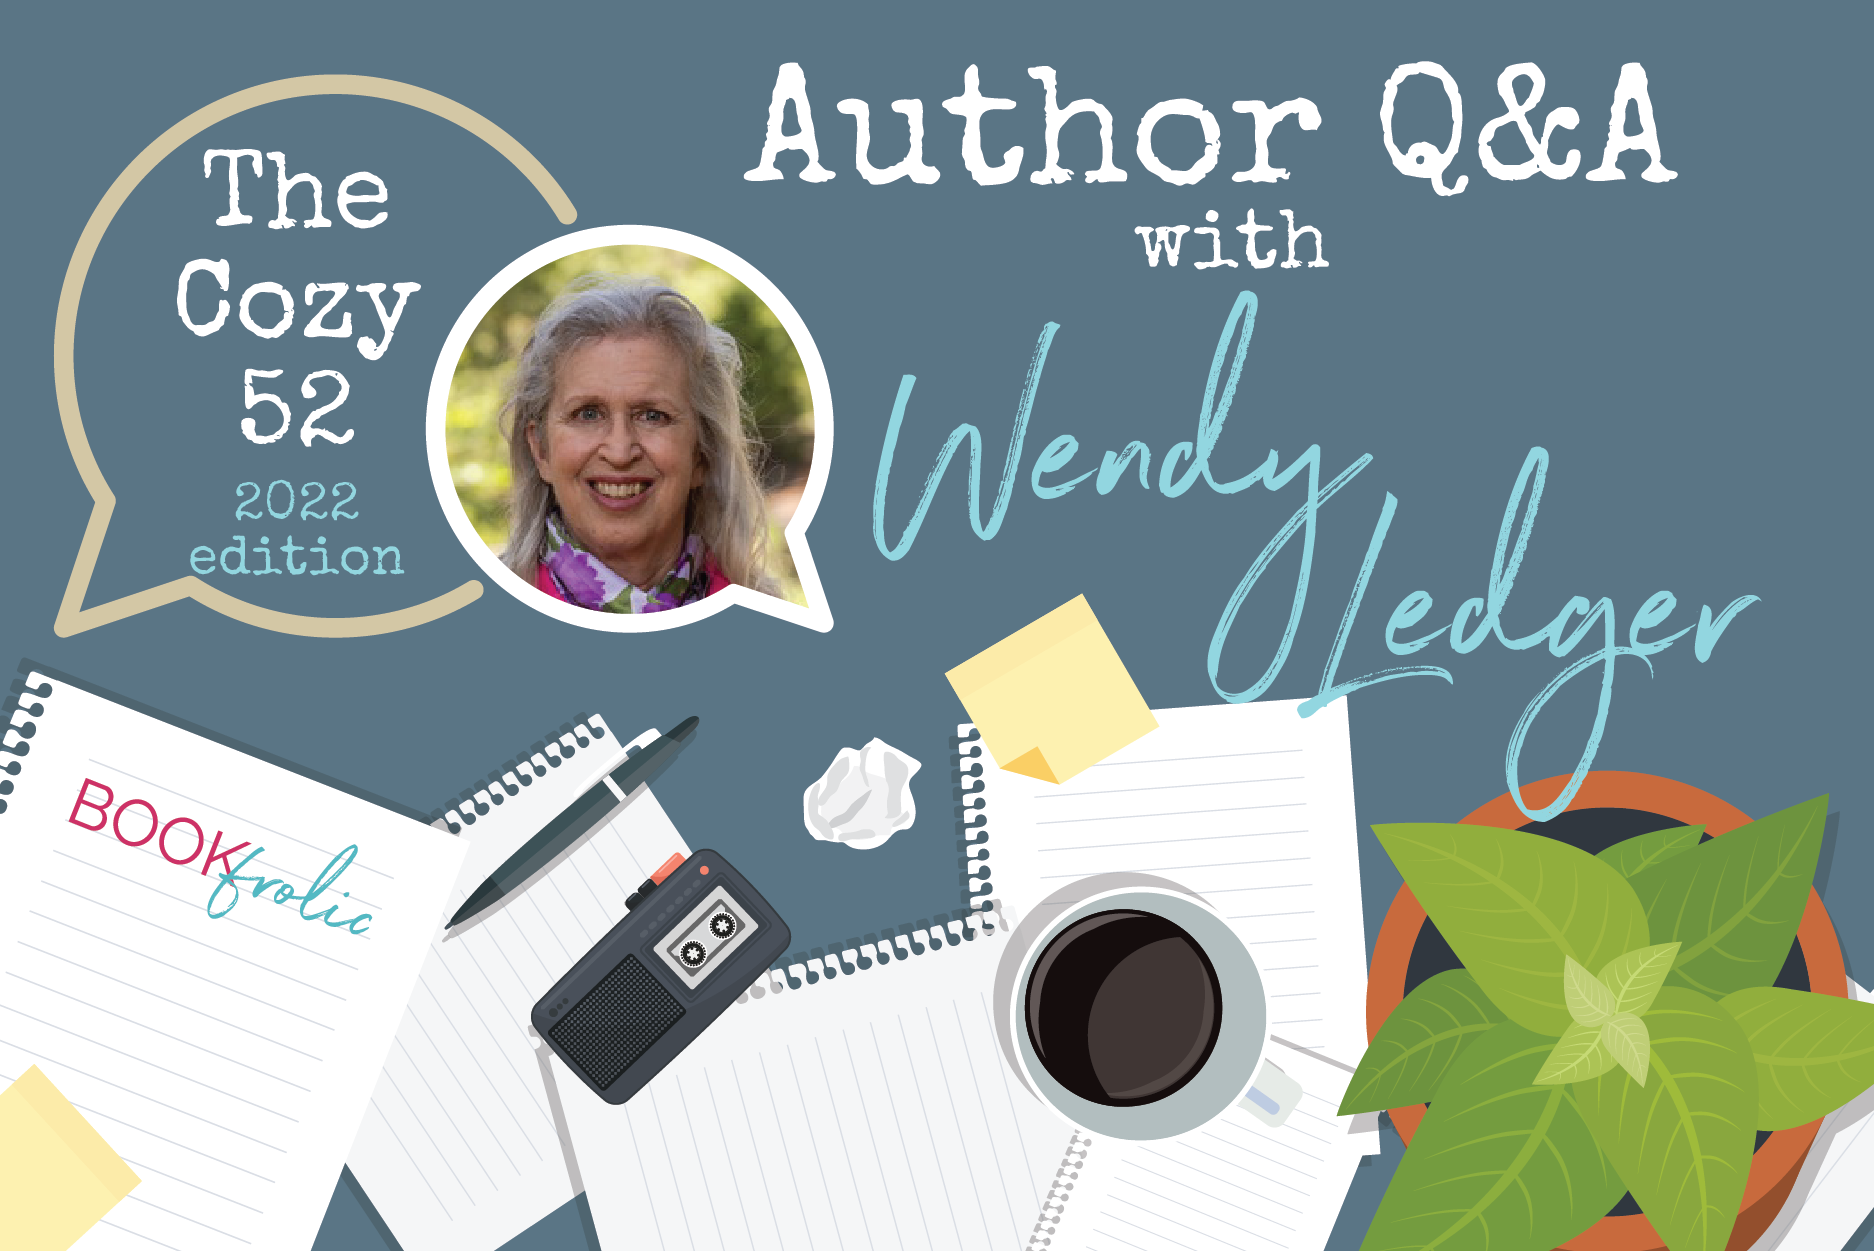 The Cozy 52 interview with author Wendy Ledger - banner